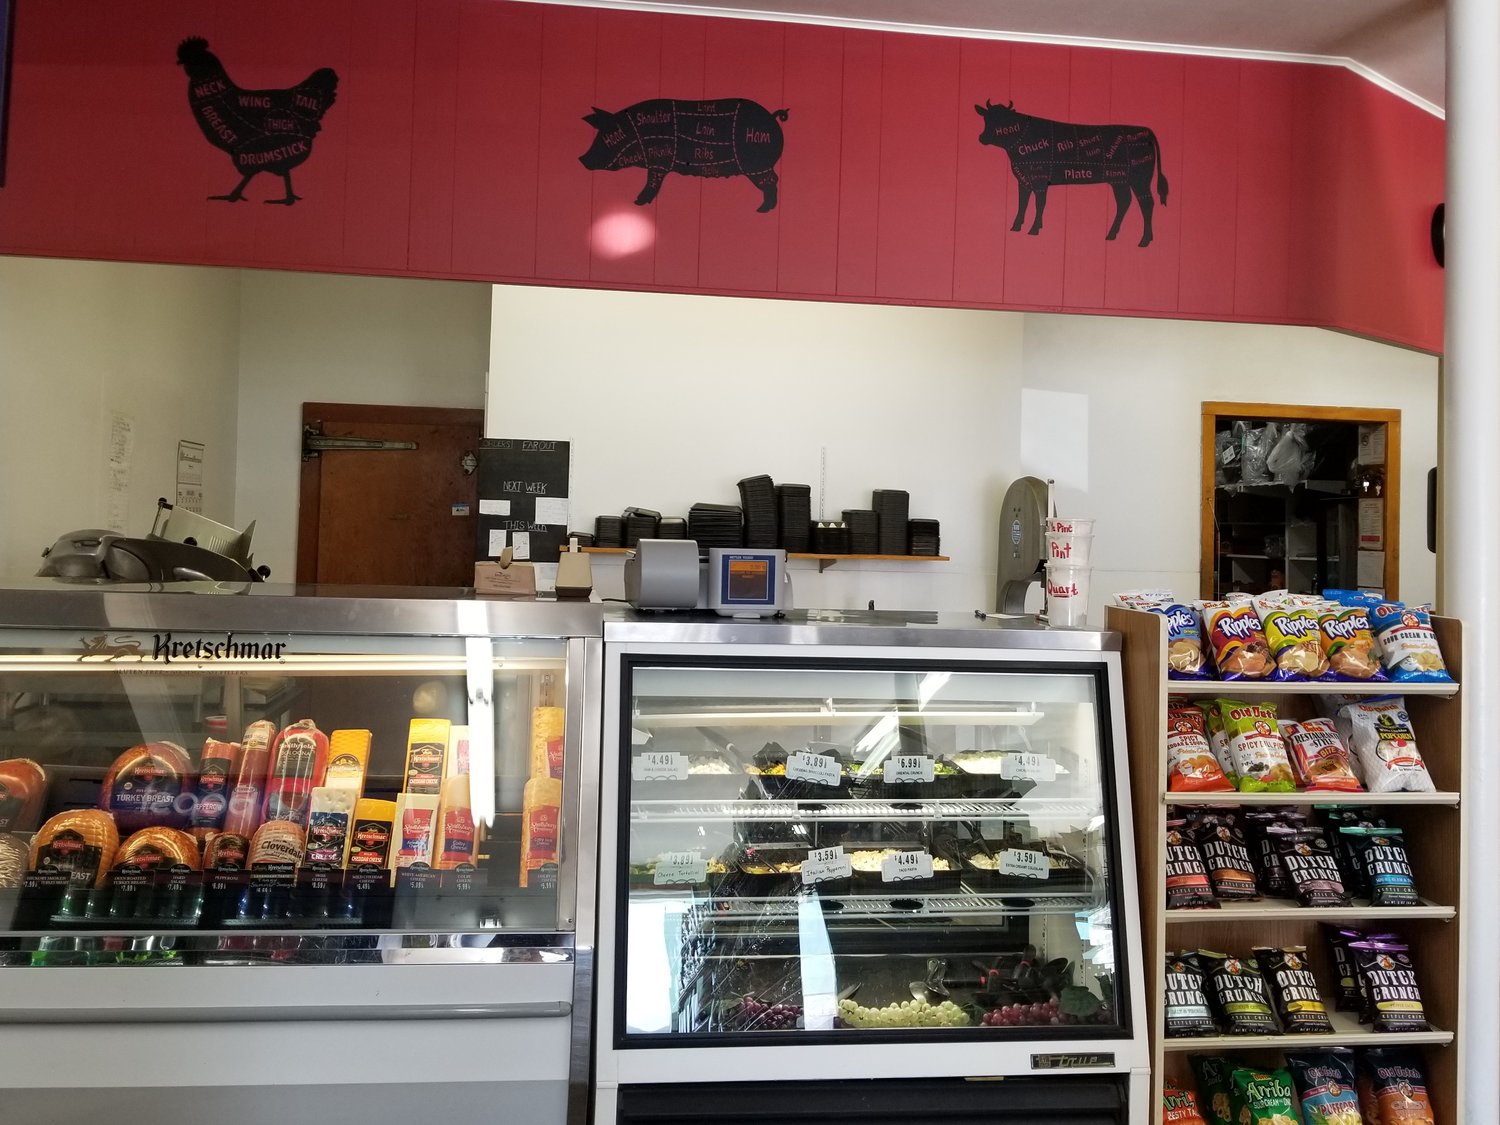 The meat and deli counter has kept its location and favorite items but has an updated look with fresh paint and market silhouettes on the header above.